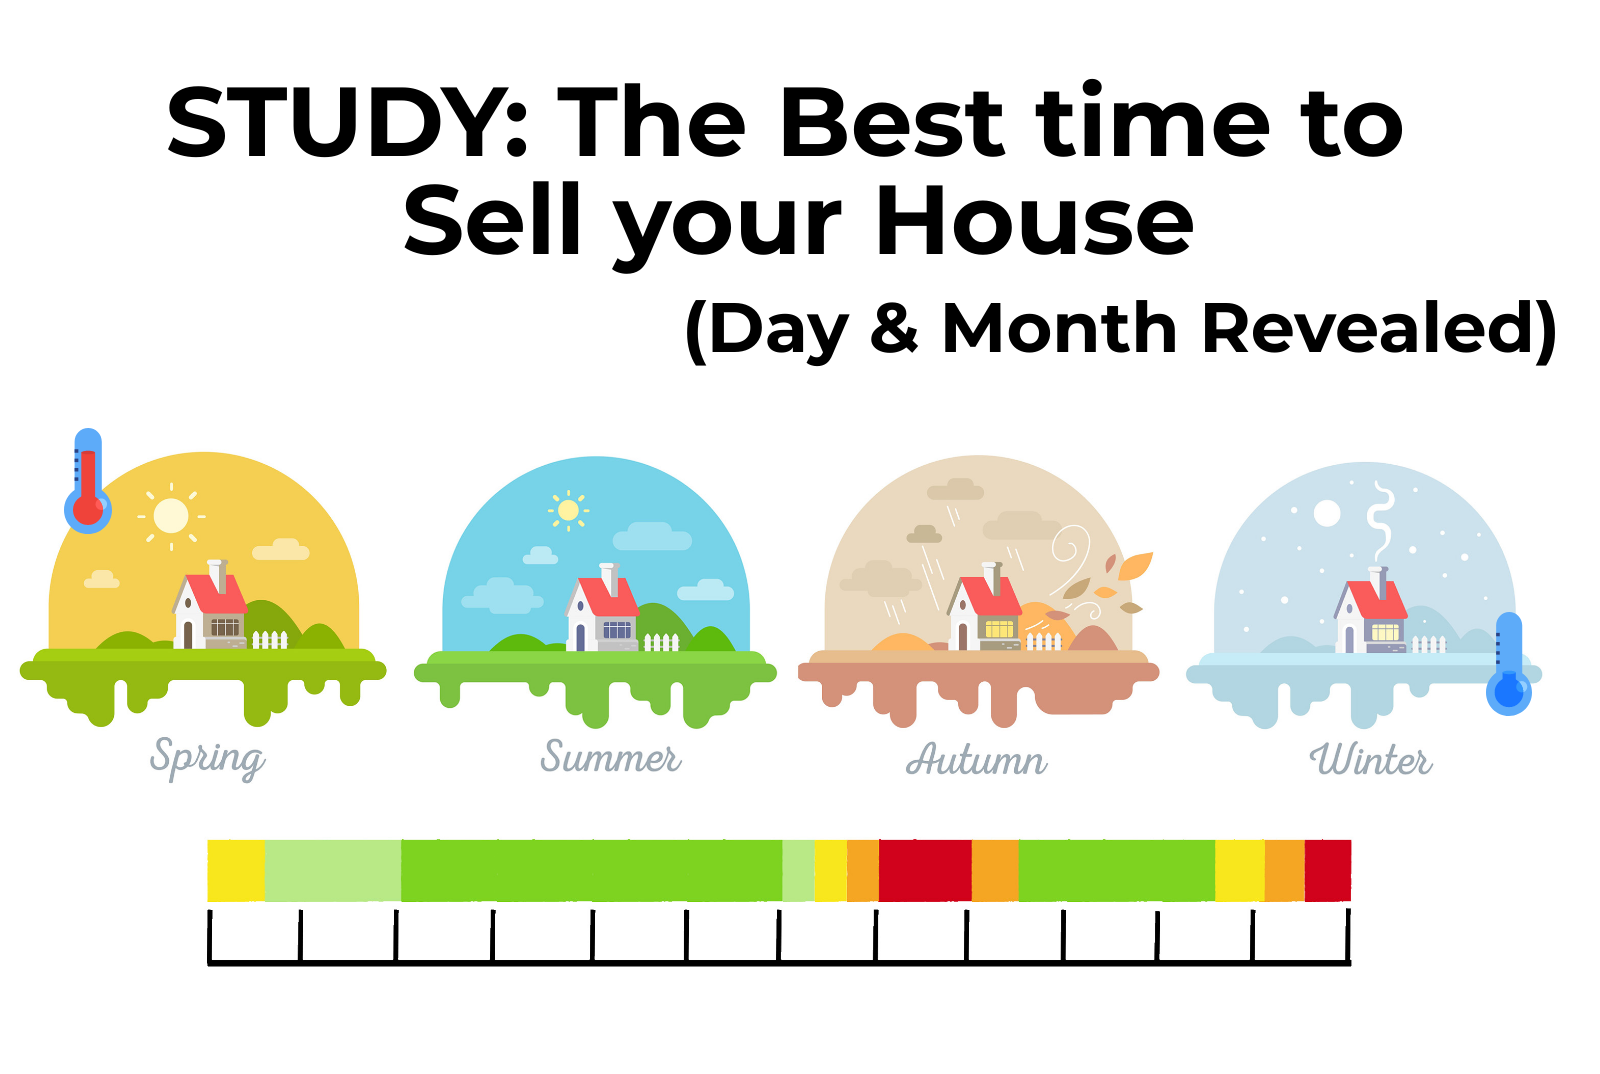 A study of the best time to sell your house, revealing the best days, months and seasons